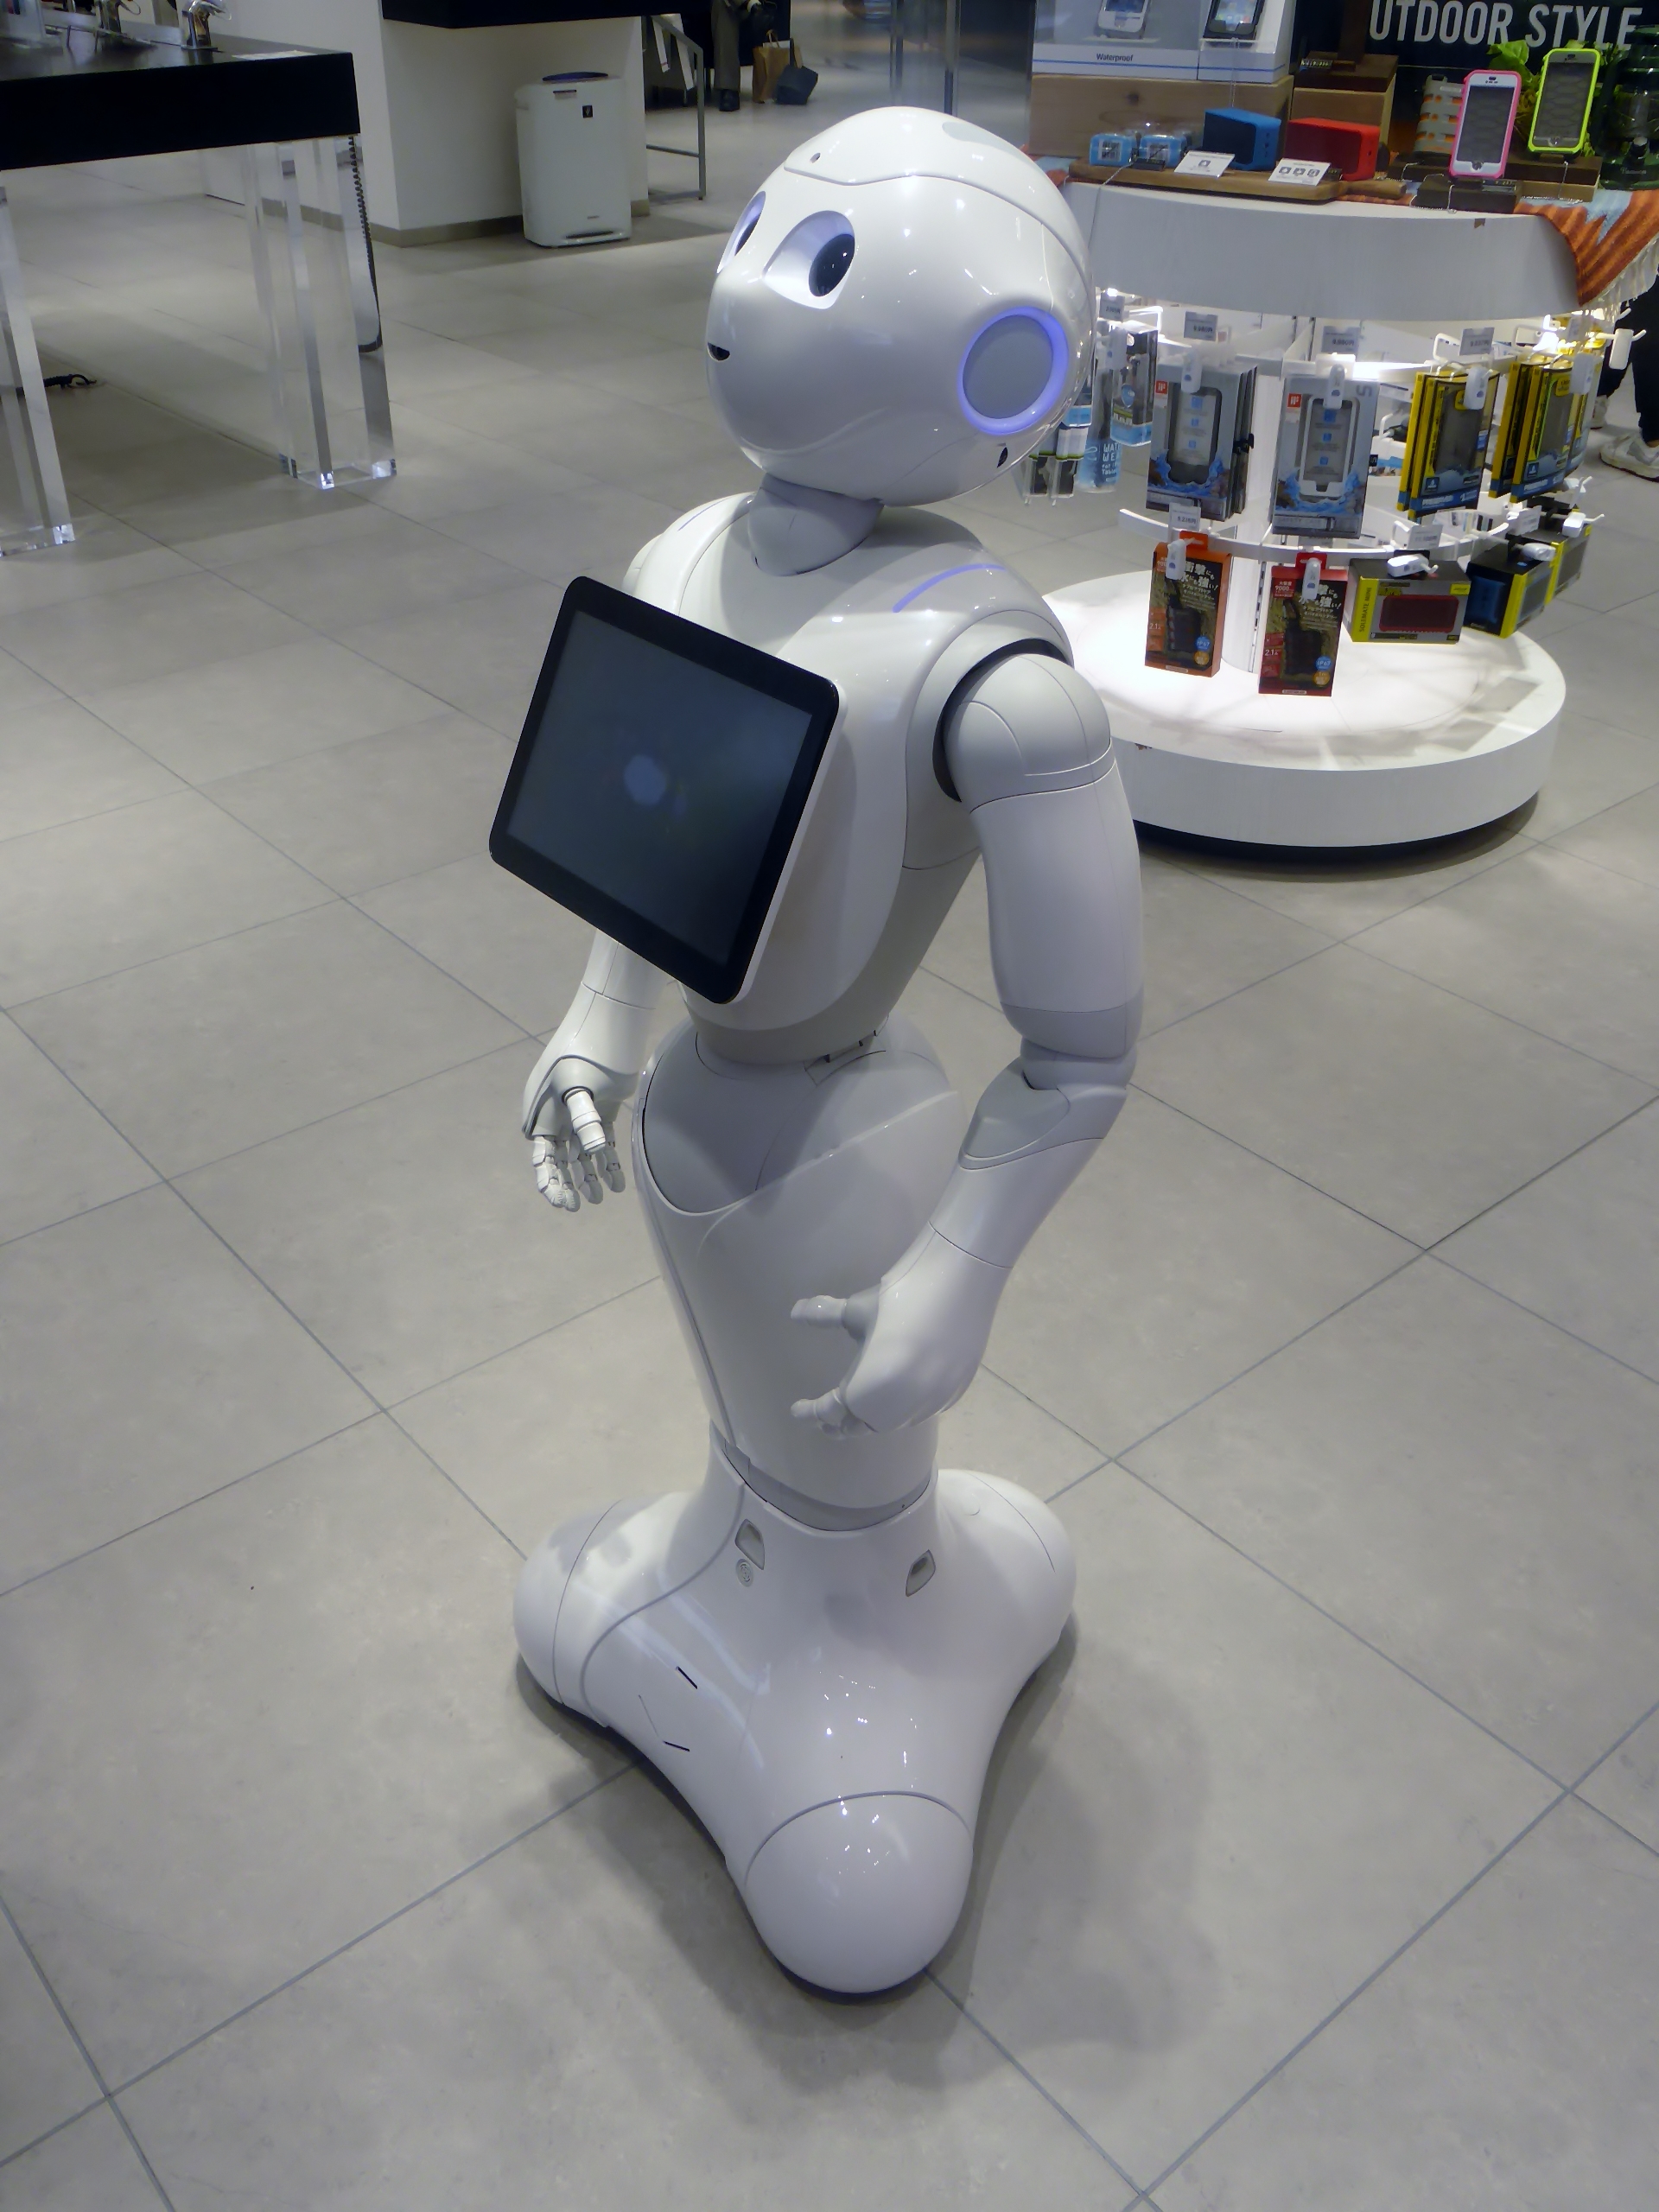 Pepper robot in a retail store